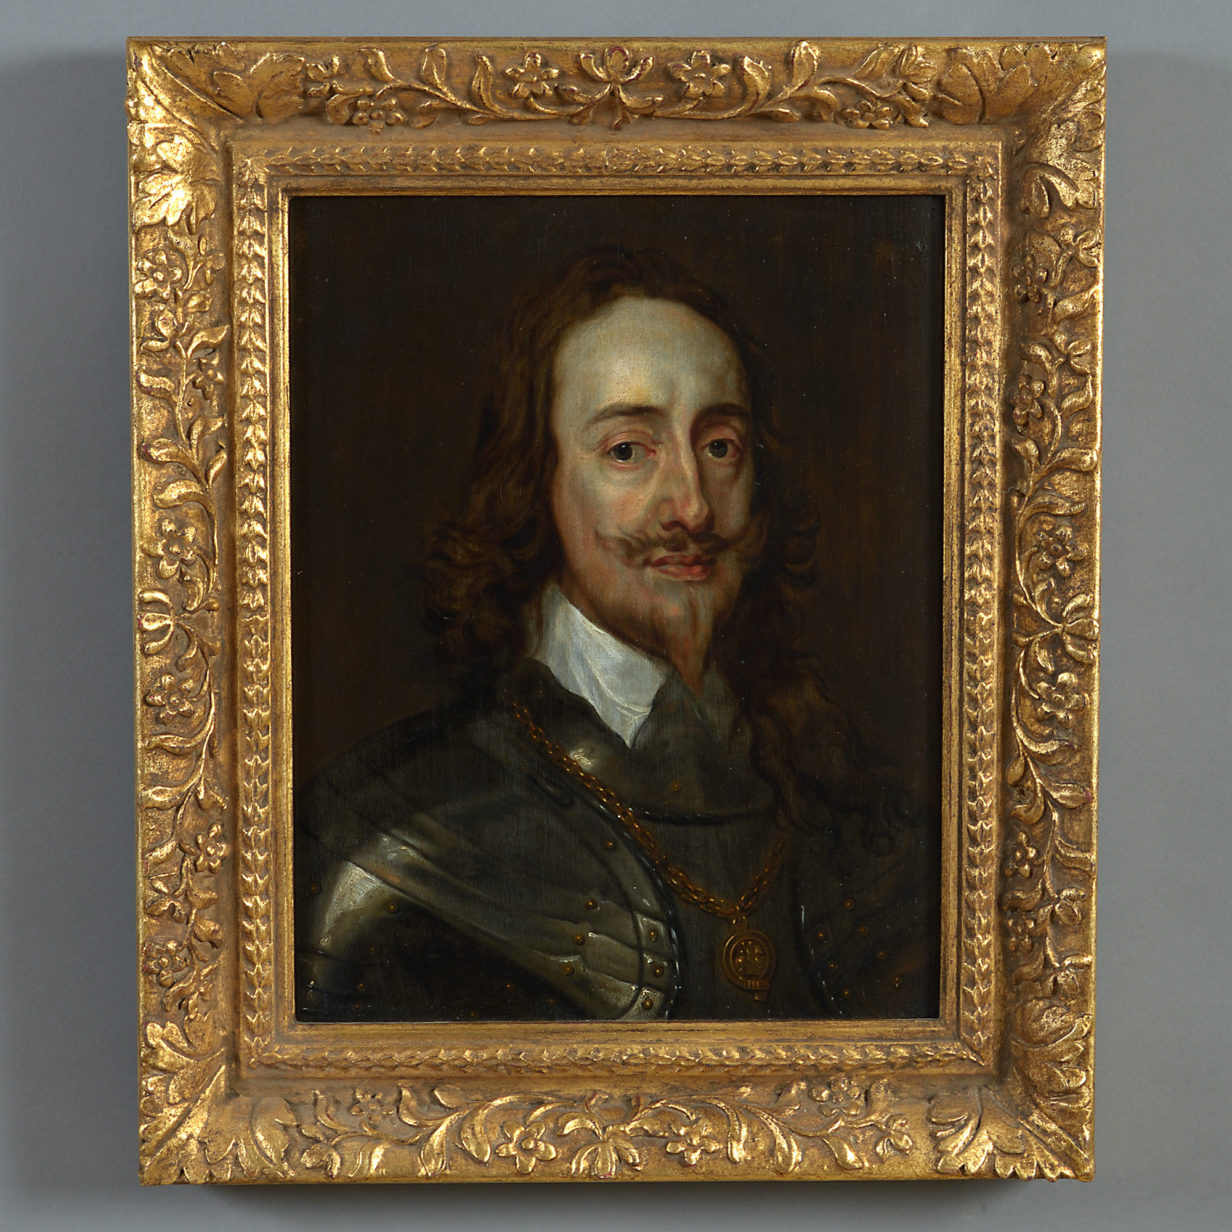 Theodore roussel, portrait of king charles i